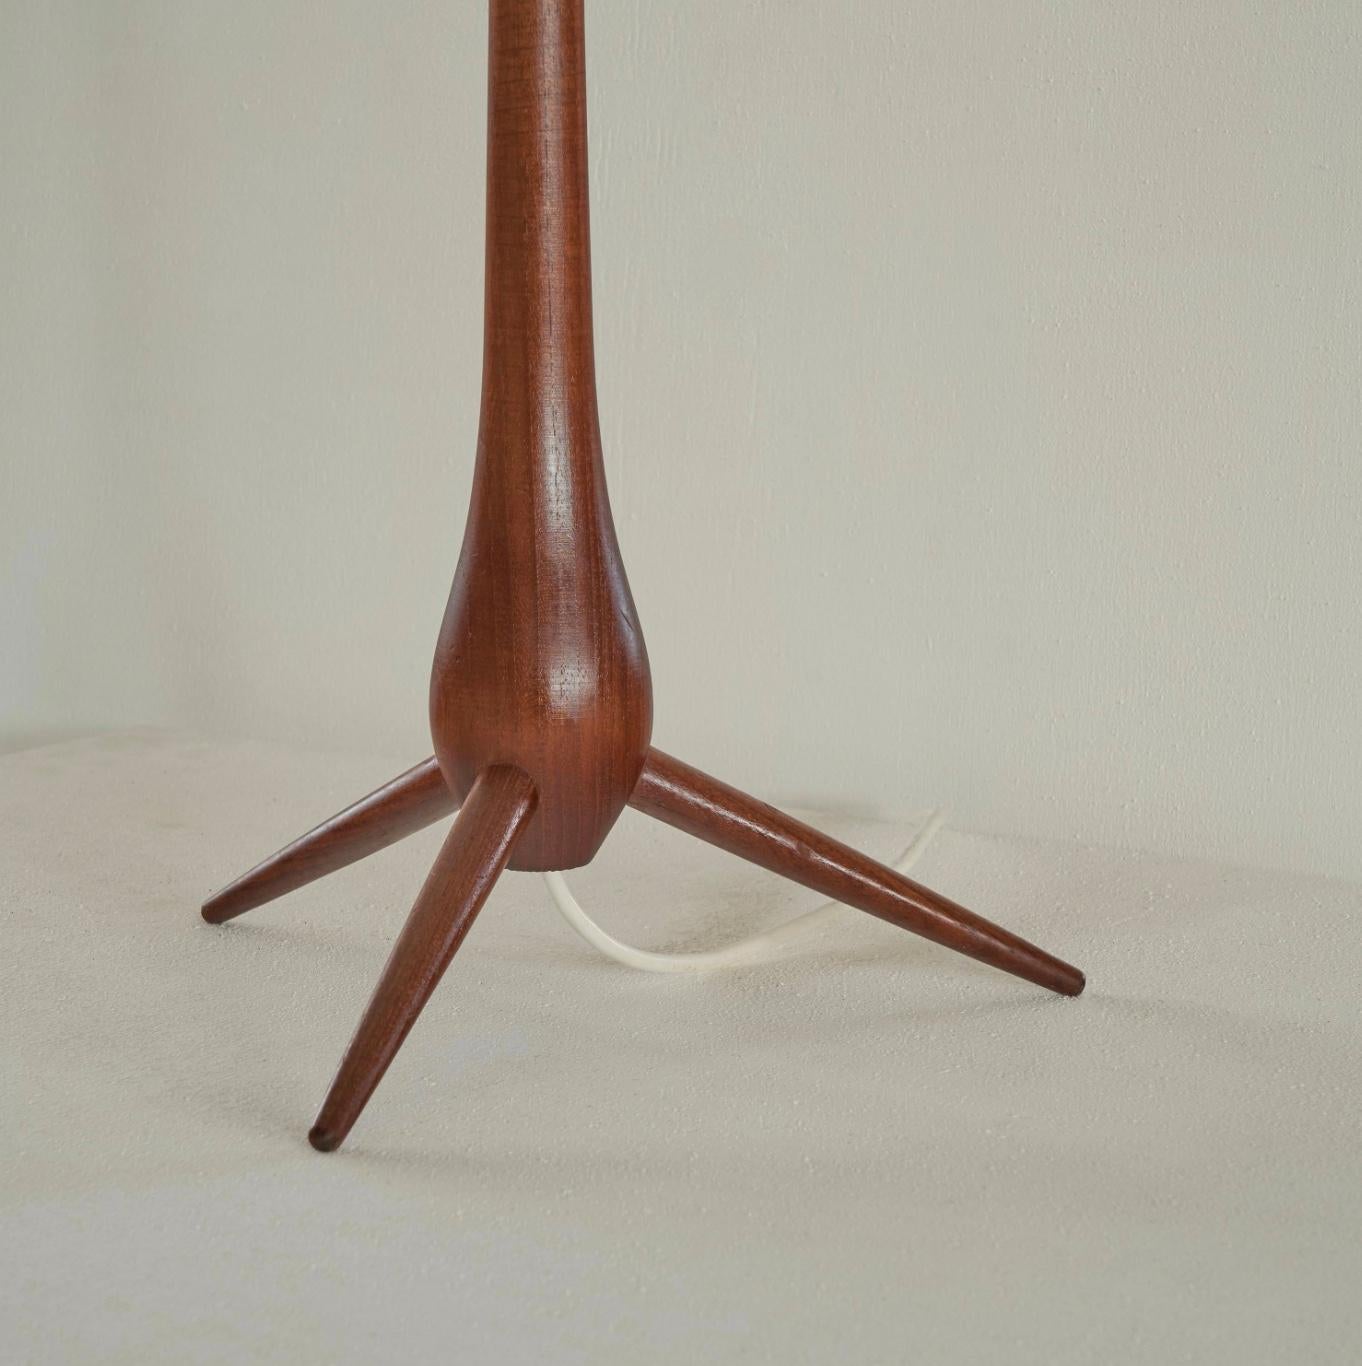 Hand-Crafted Mid Century Tripod Floor or Table Lamp in Teak and Parchment 1960s For Sale